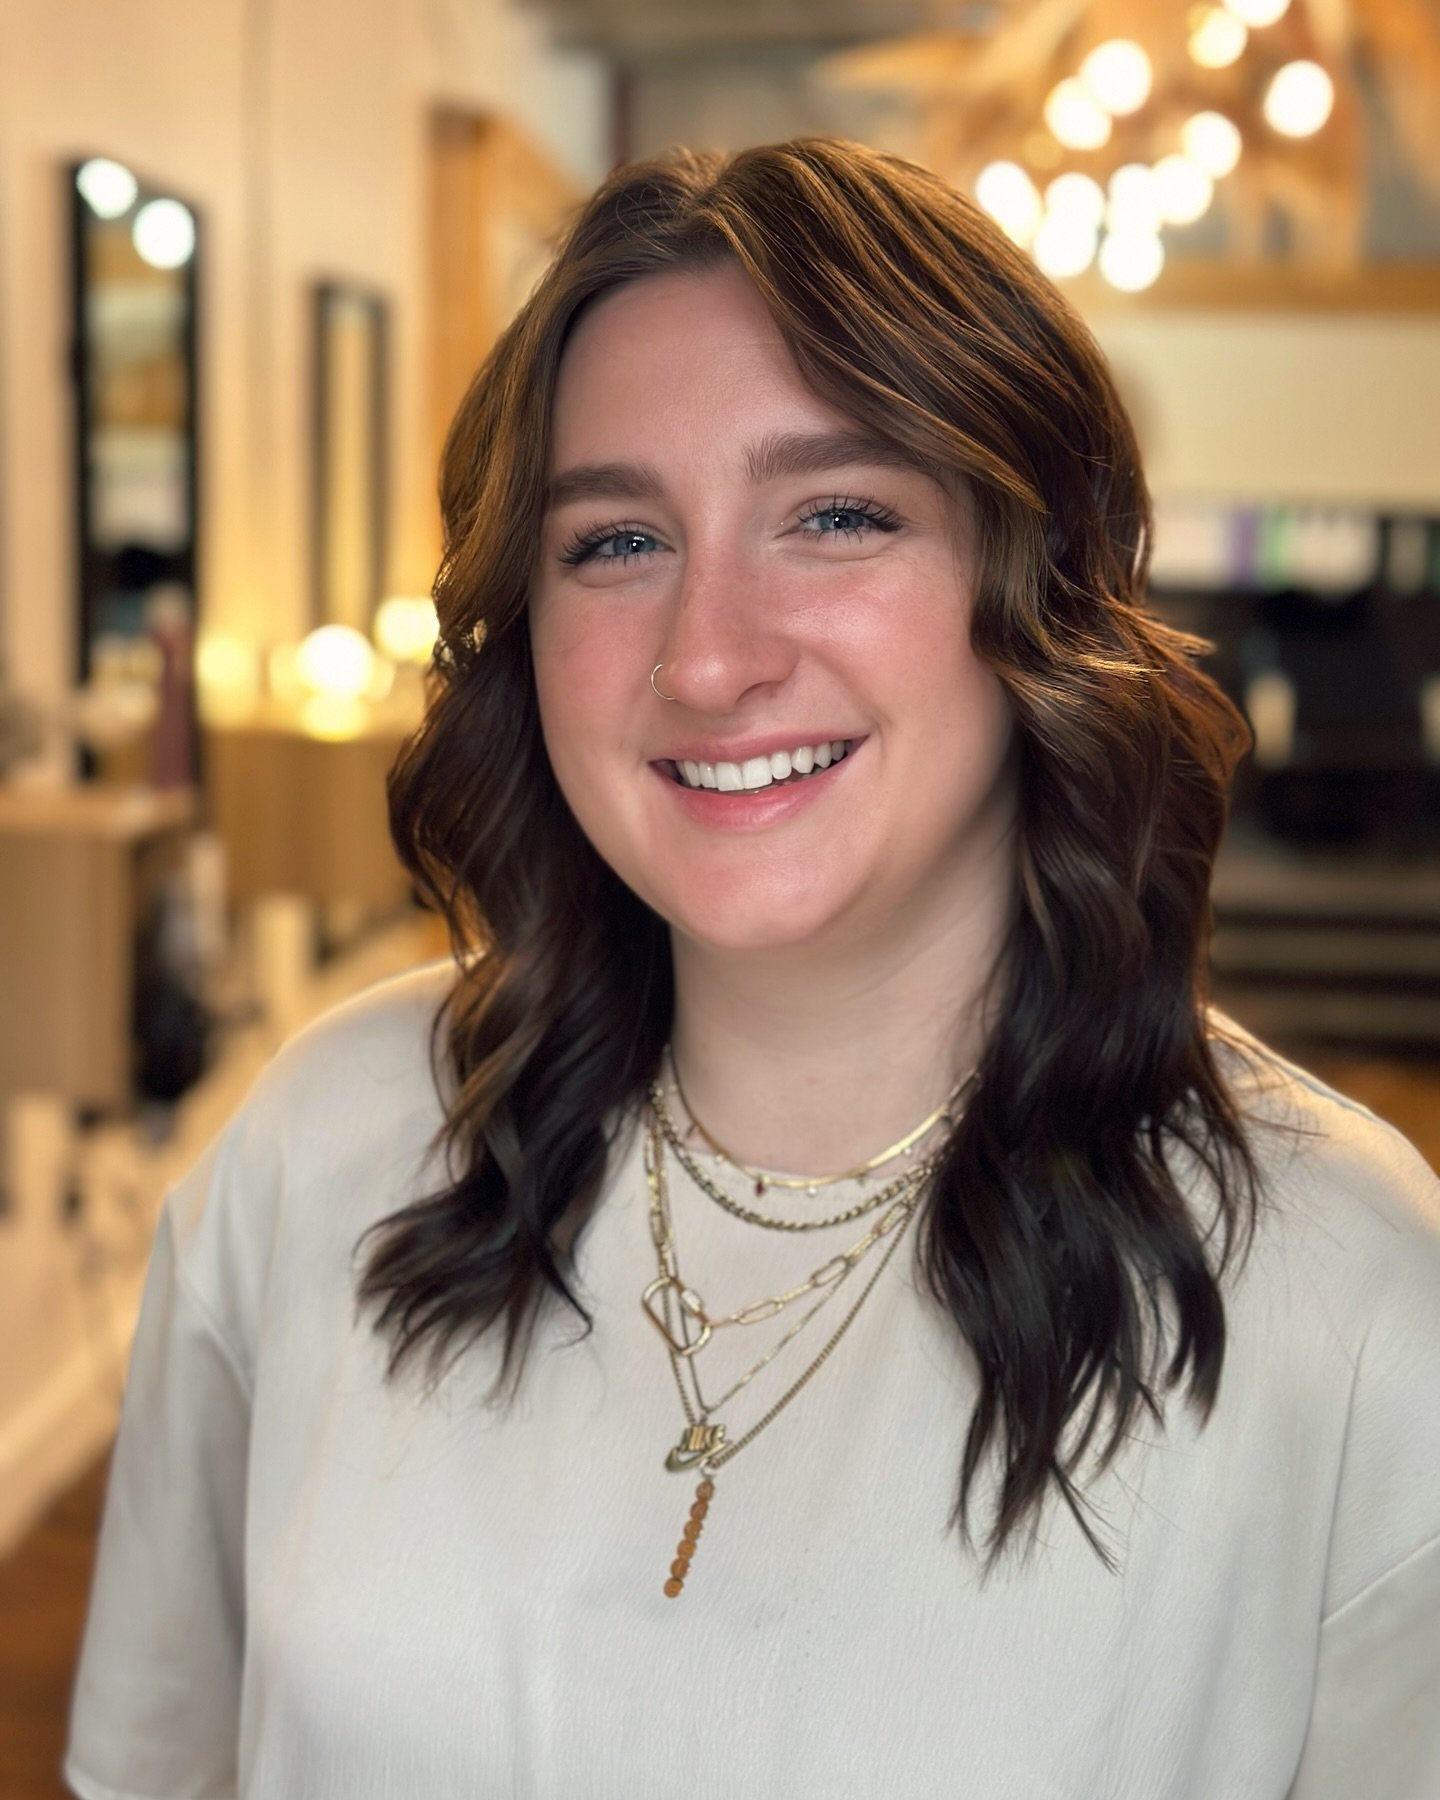 Welcome one of our newest stylist Maggie @cosmetologybymaggie to the team!! Maggie is a queer, fourth generation Oregonian who has had a lifelong passion for all things beauty. She is driven by her love for meeting new people and working with each cl